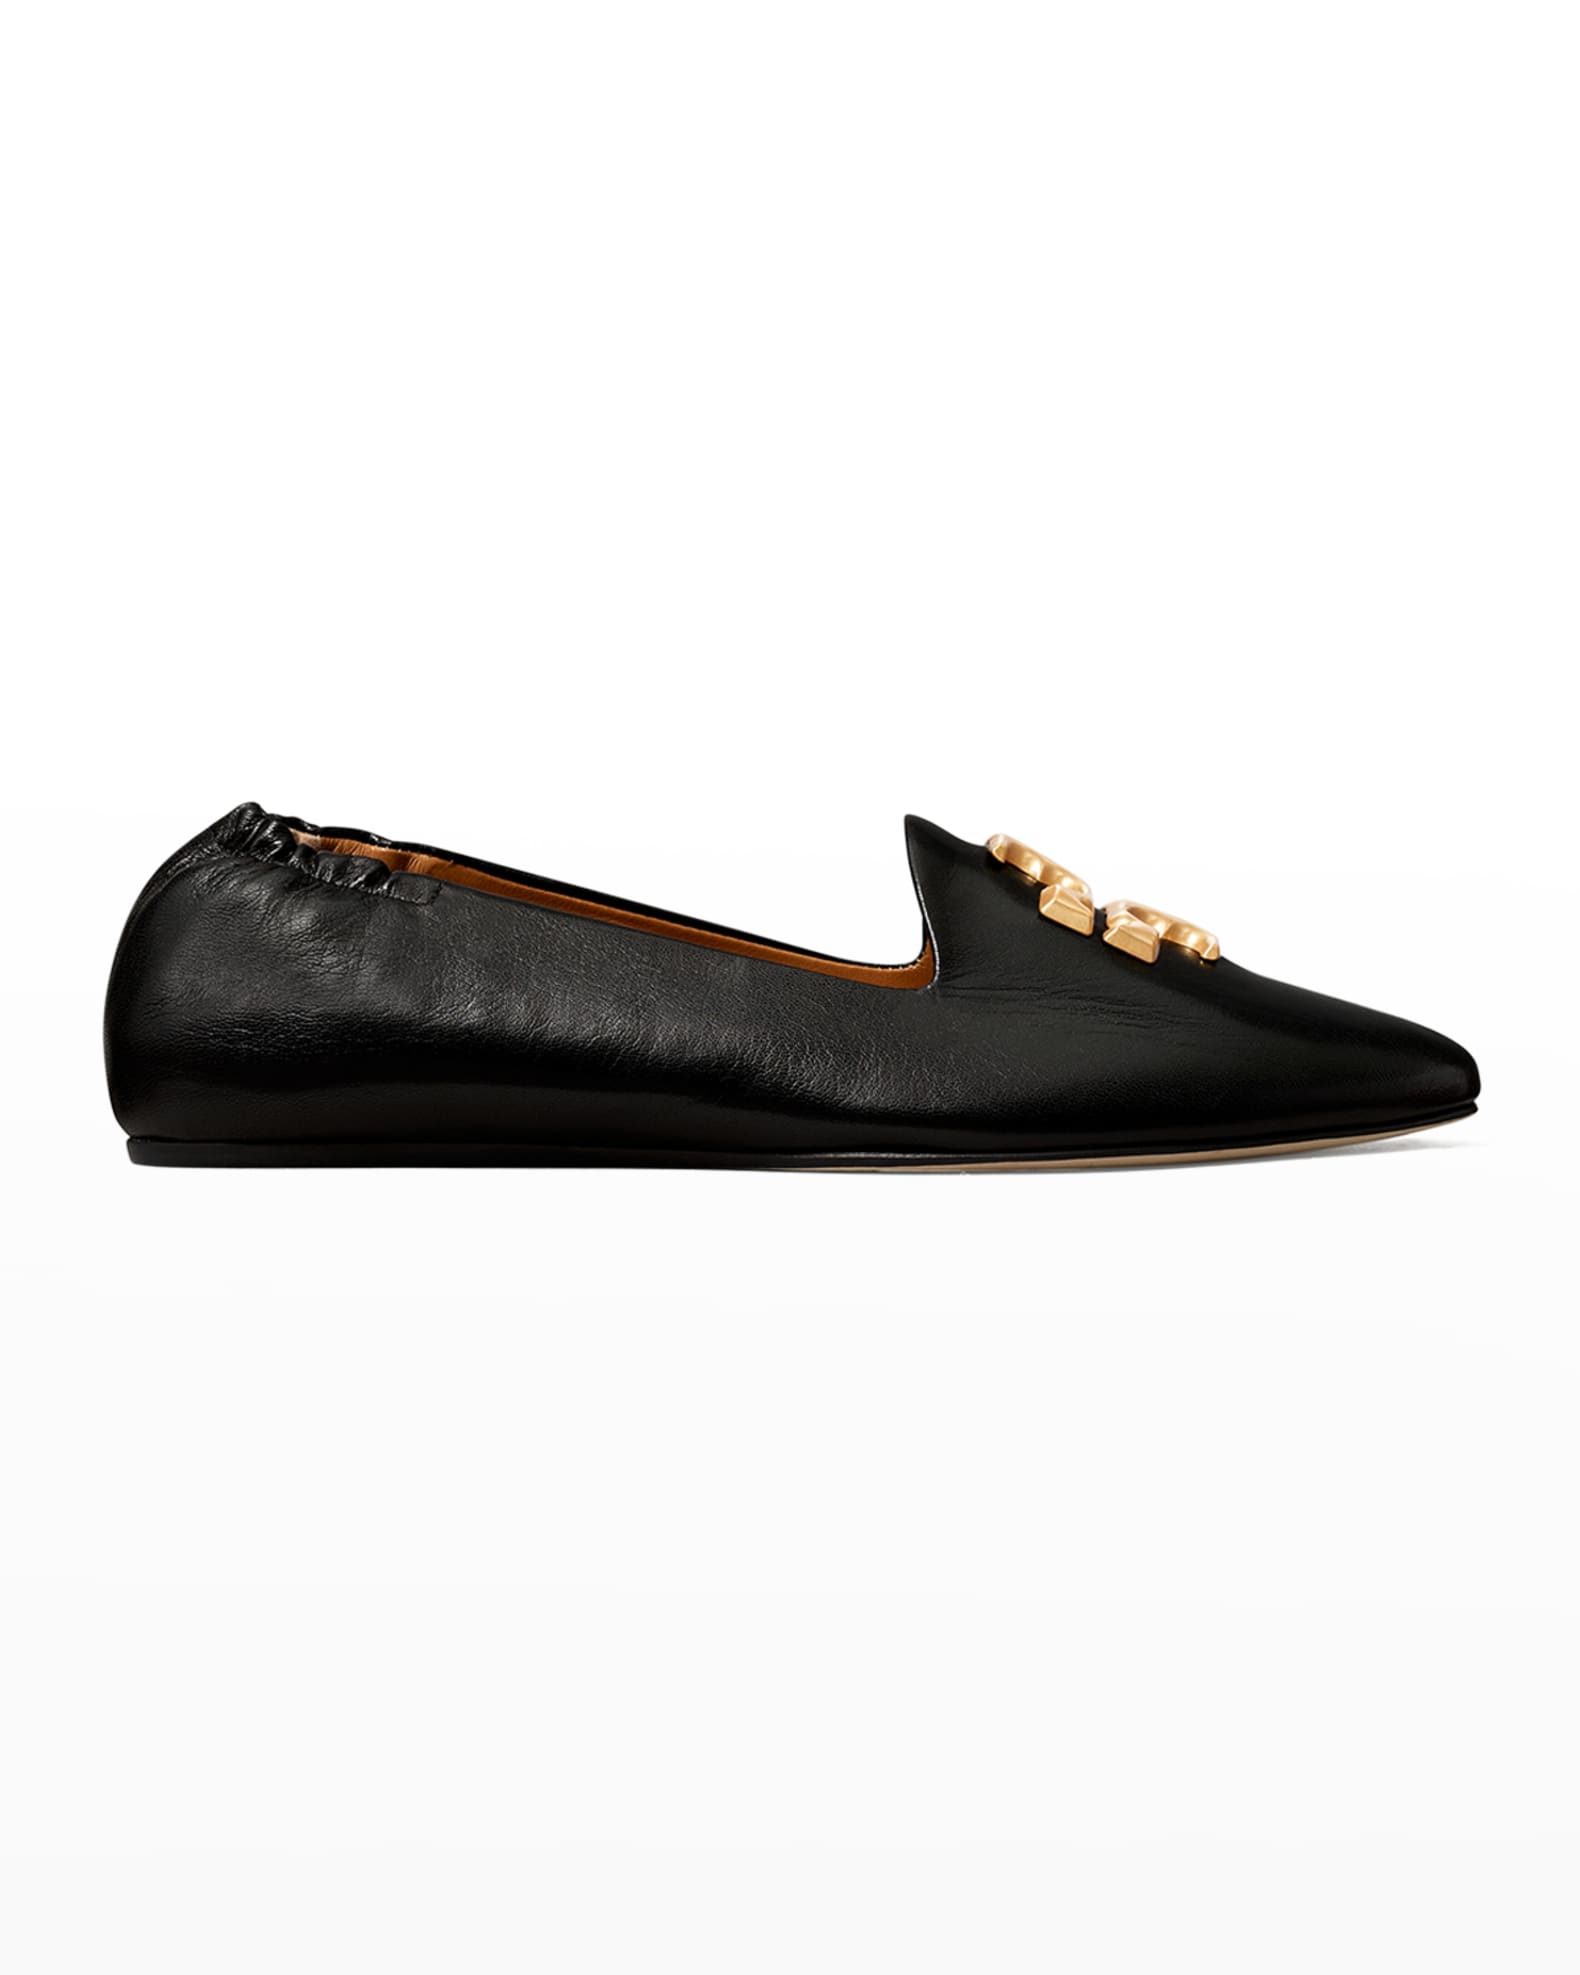 Tory Burch Eleanor Leather Medallion Loafers | Neiman Marcus